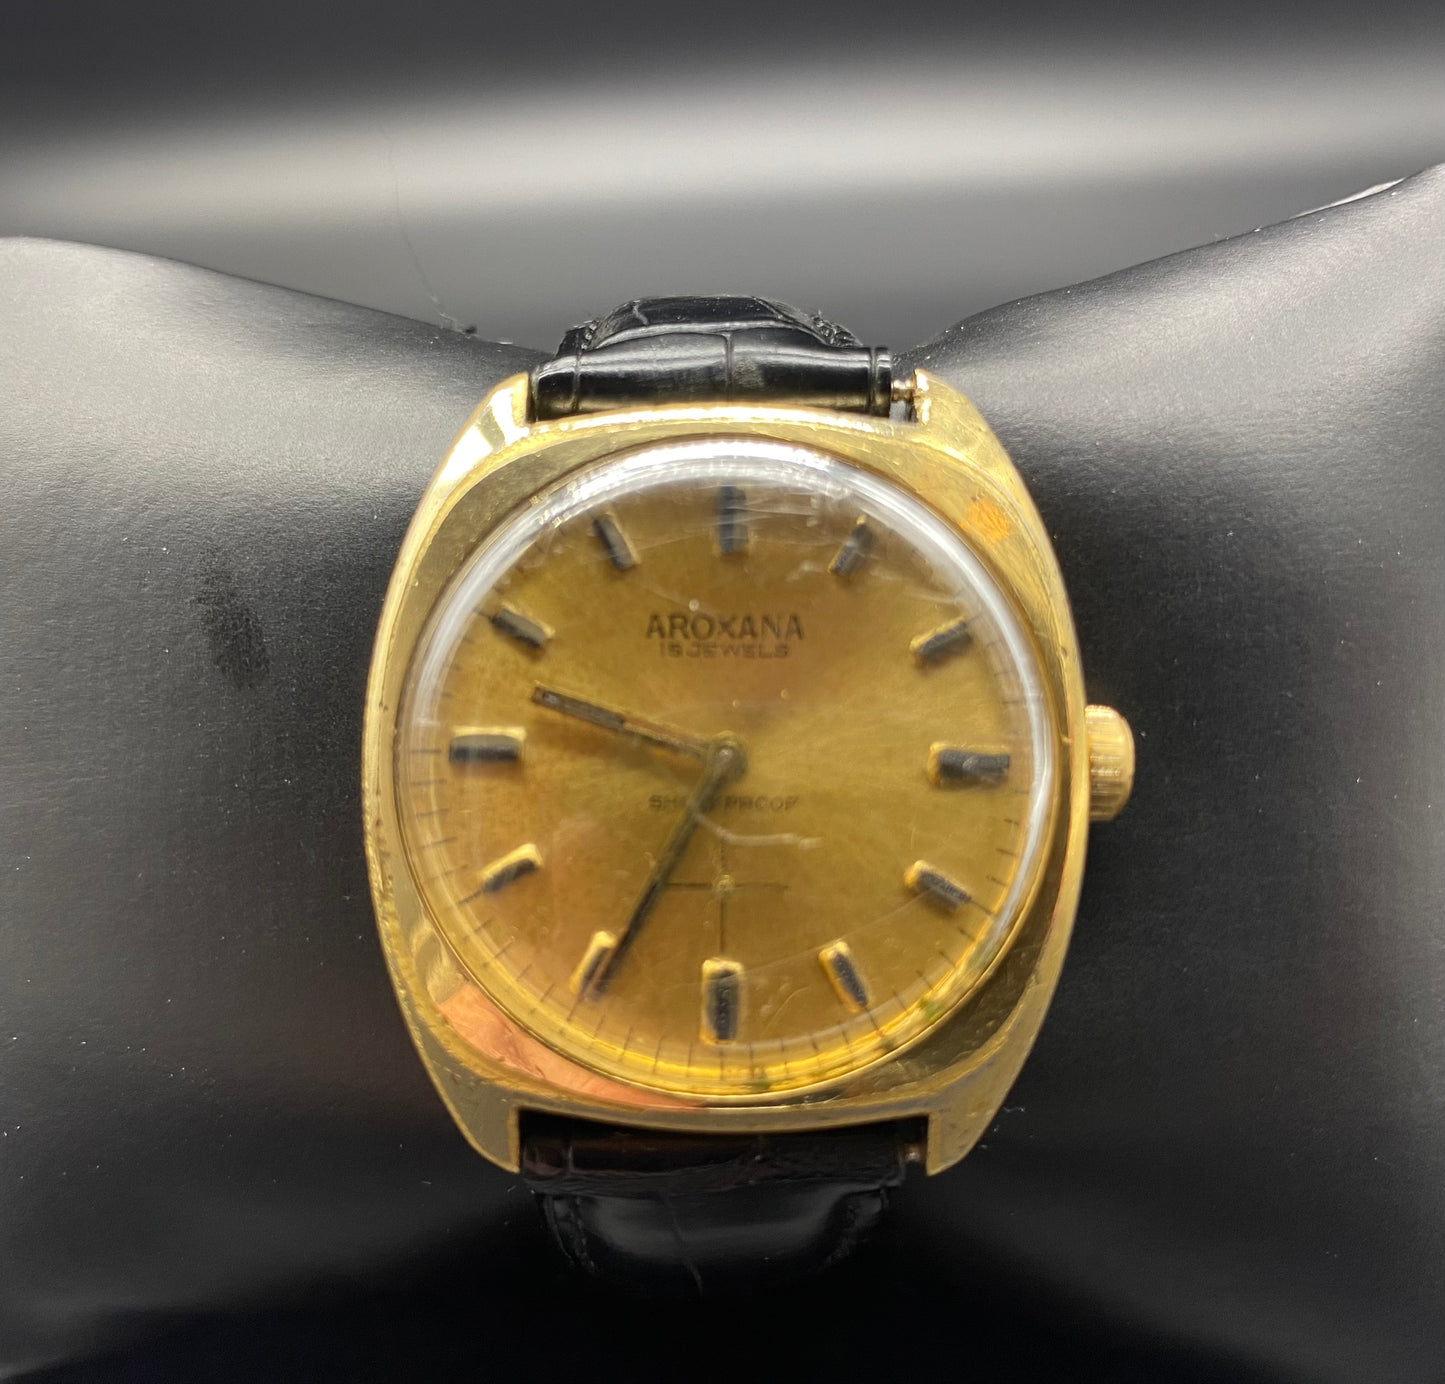 Vintage Seiko Watches Online Retro SWISS AROXANA 15 Jewels Antimagnetic Watch   RARE 1960s Mens Mechanical watch on Leather Strap with a Really Nice Champagne Dial 